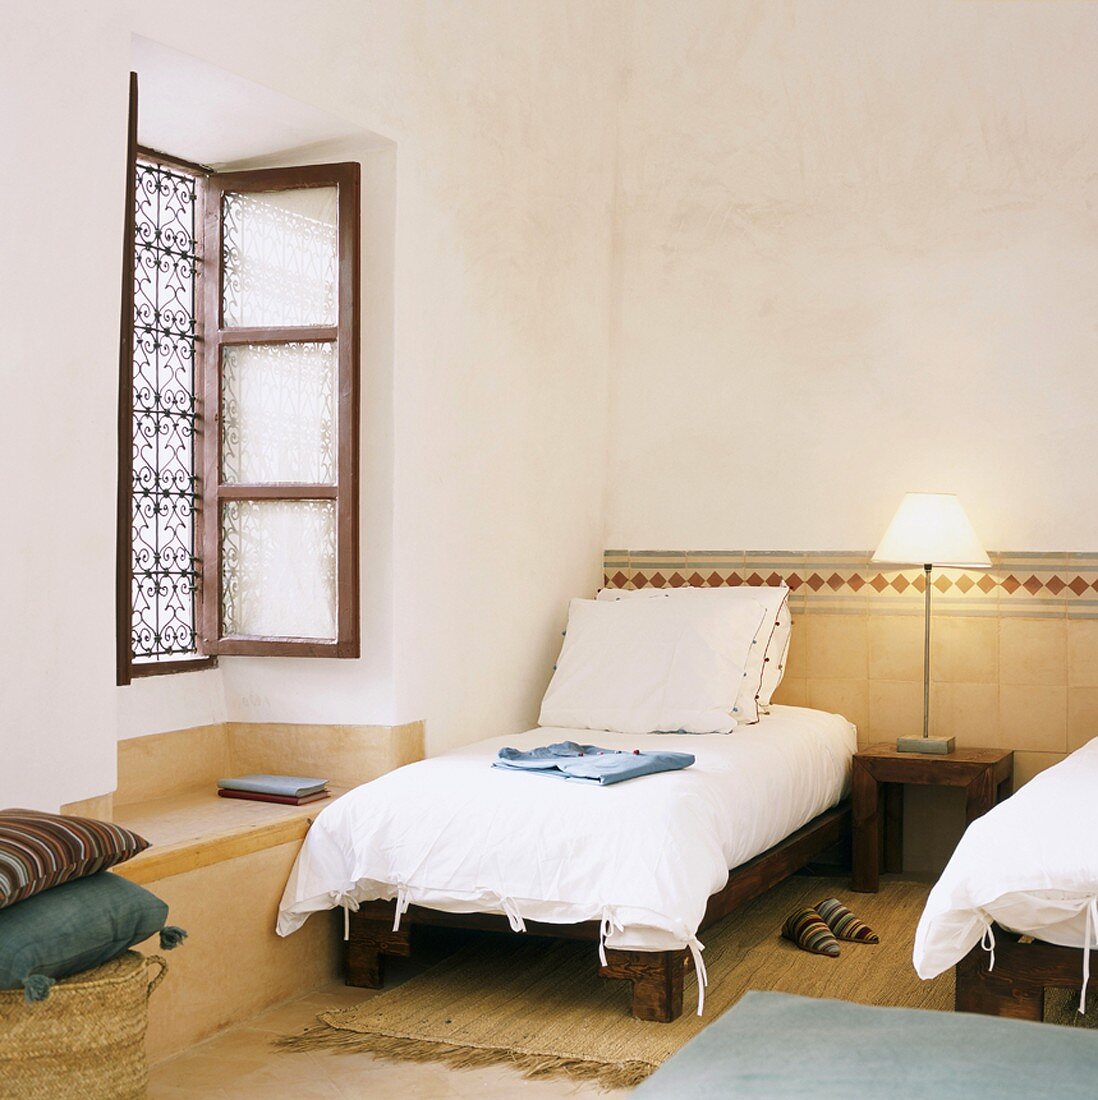 Simple, Oriental-style bedroom with half-height tiled wall and wrought iron window grille